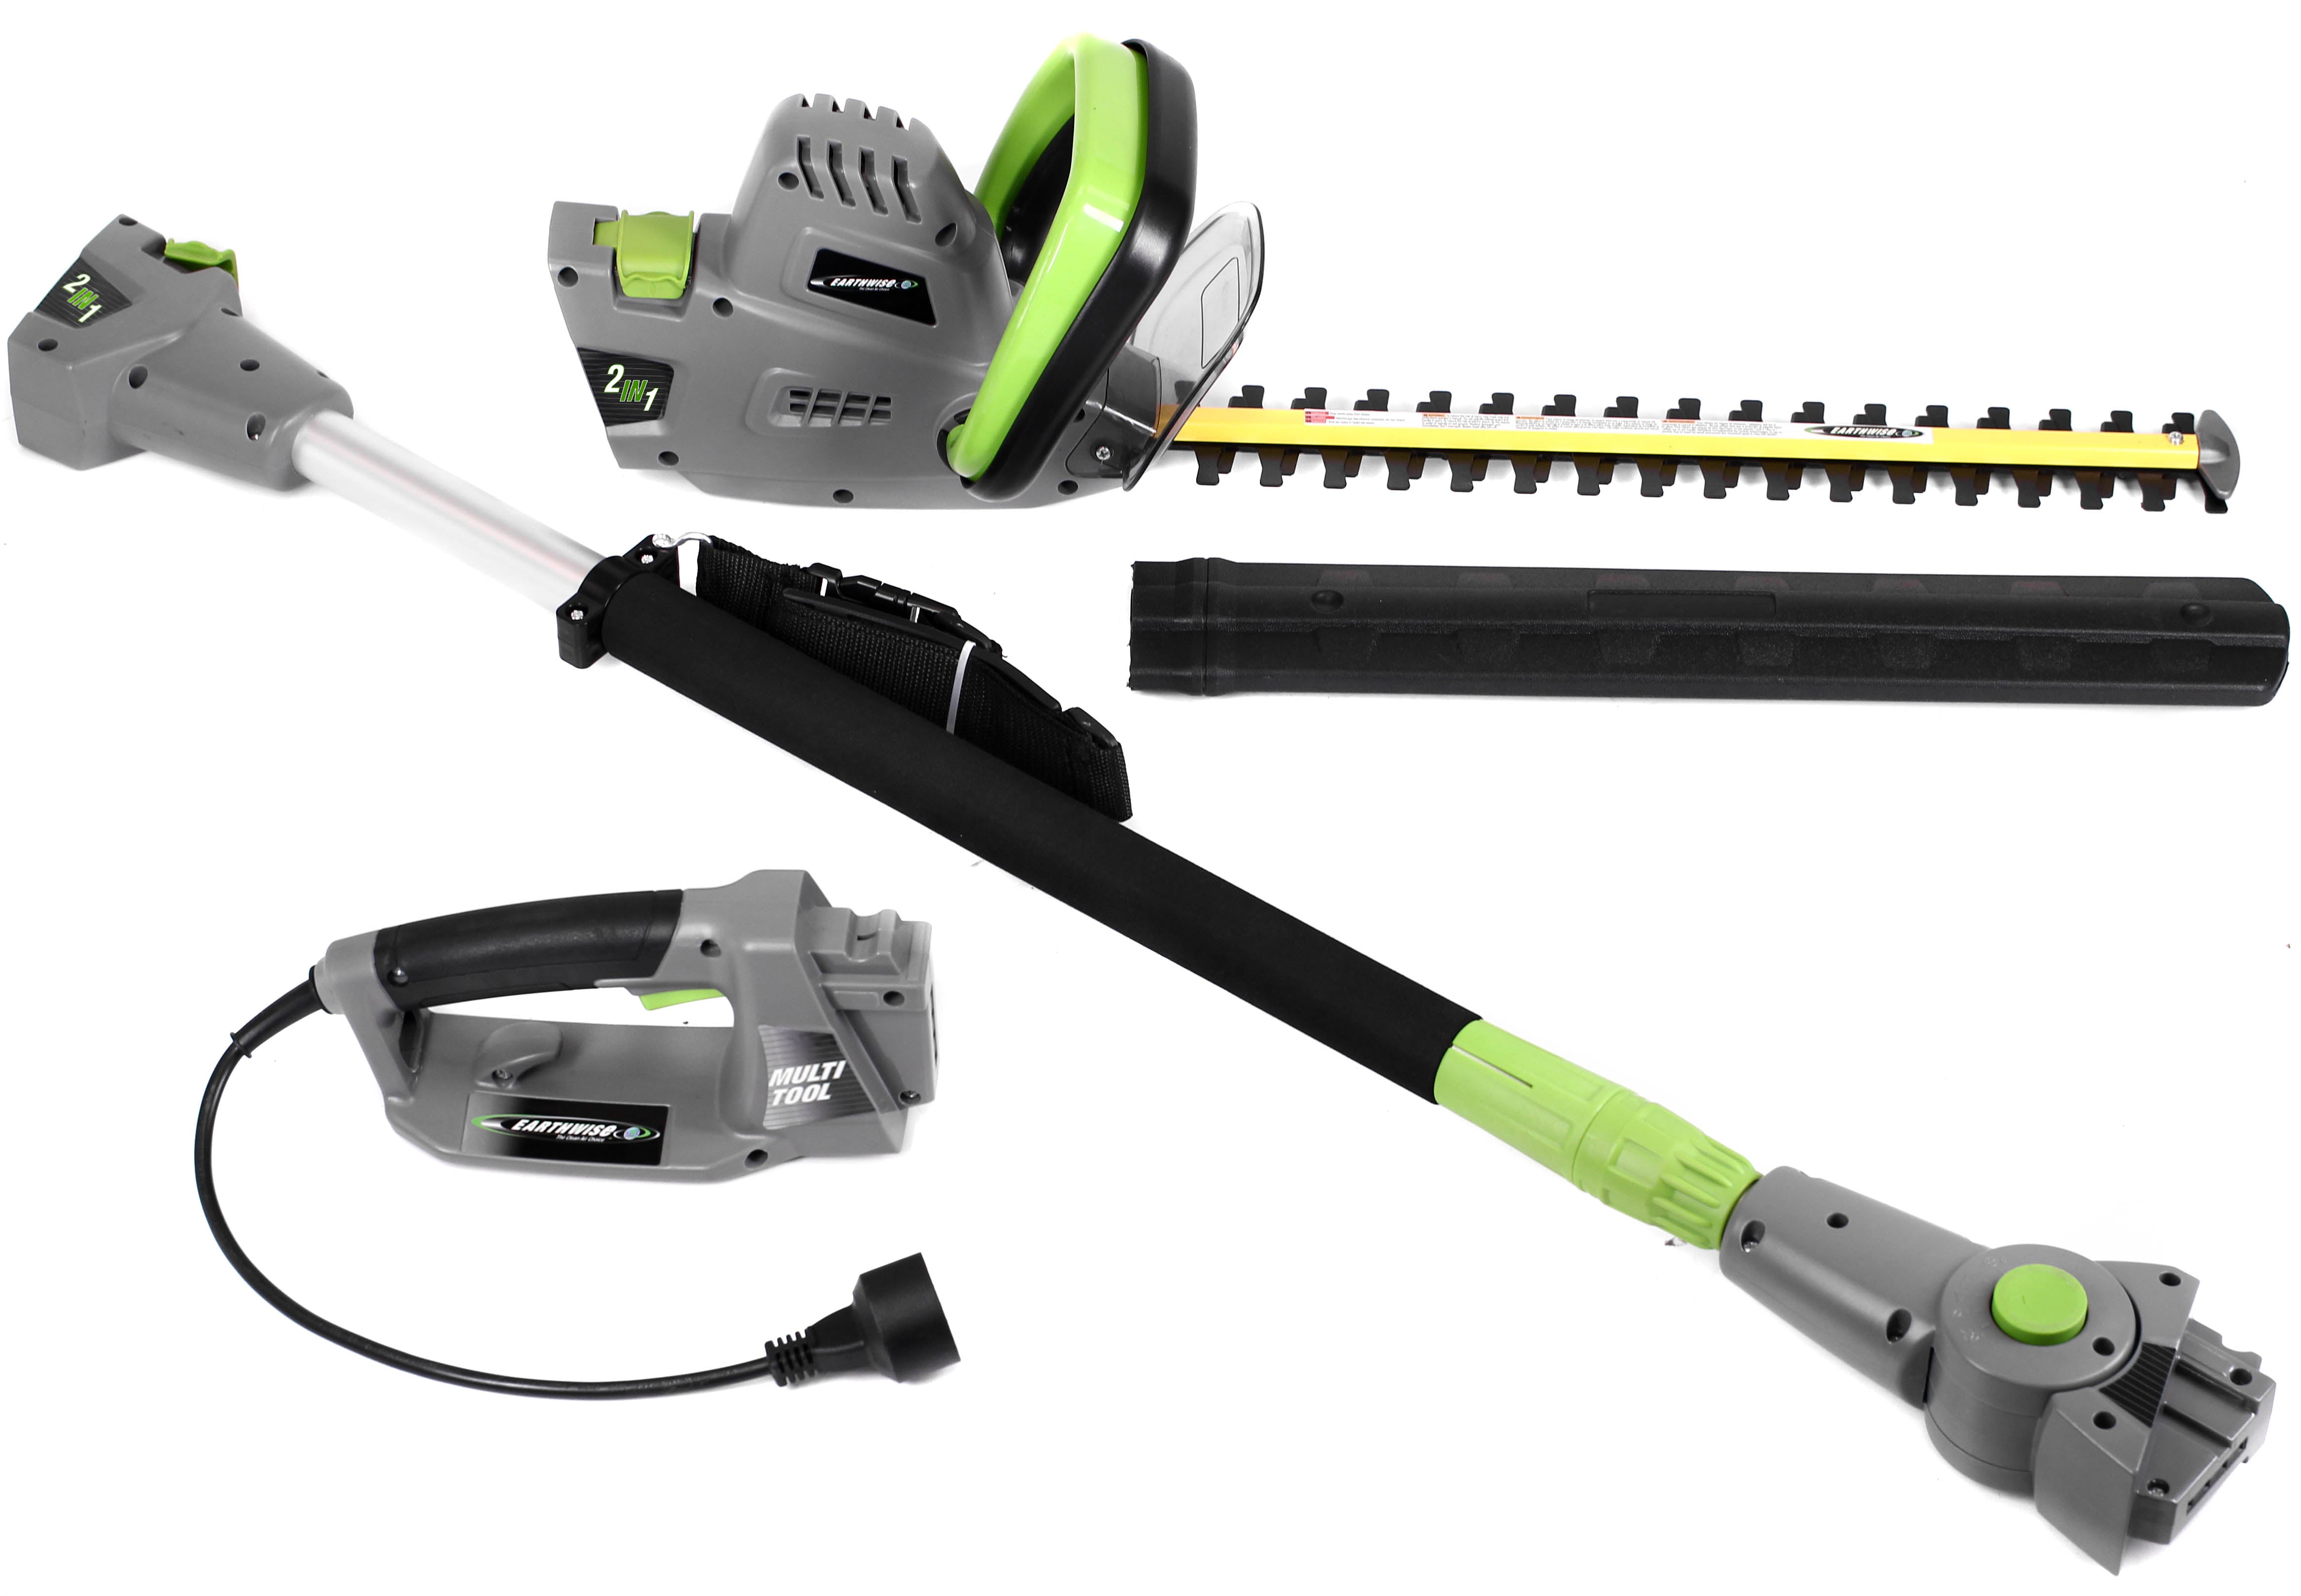 Earthwise Power Tools by ALM 20 20V 2Ah Lithium Hedge Trimmer – American  Lawn Mower Co. EST 1895